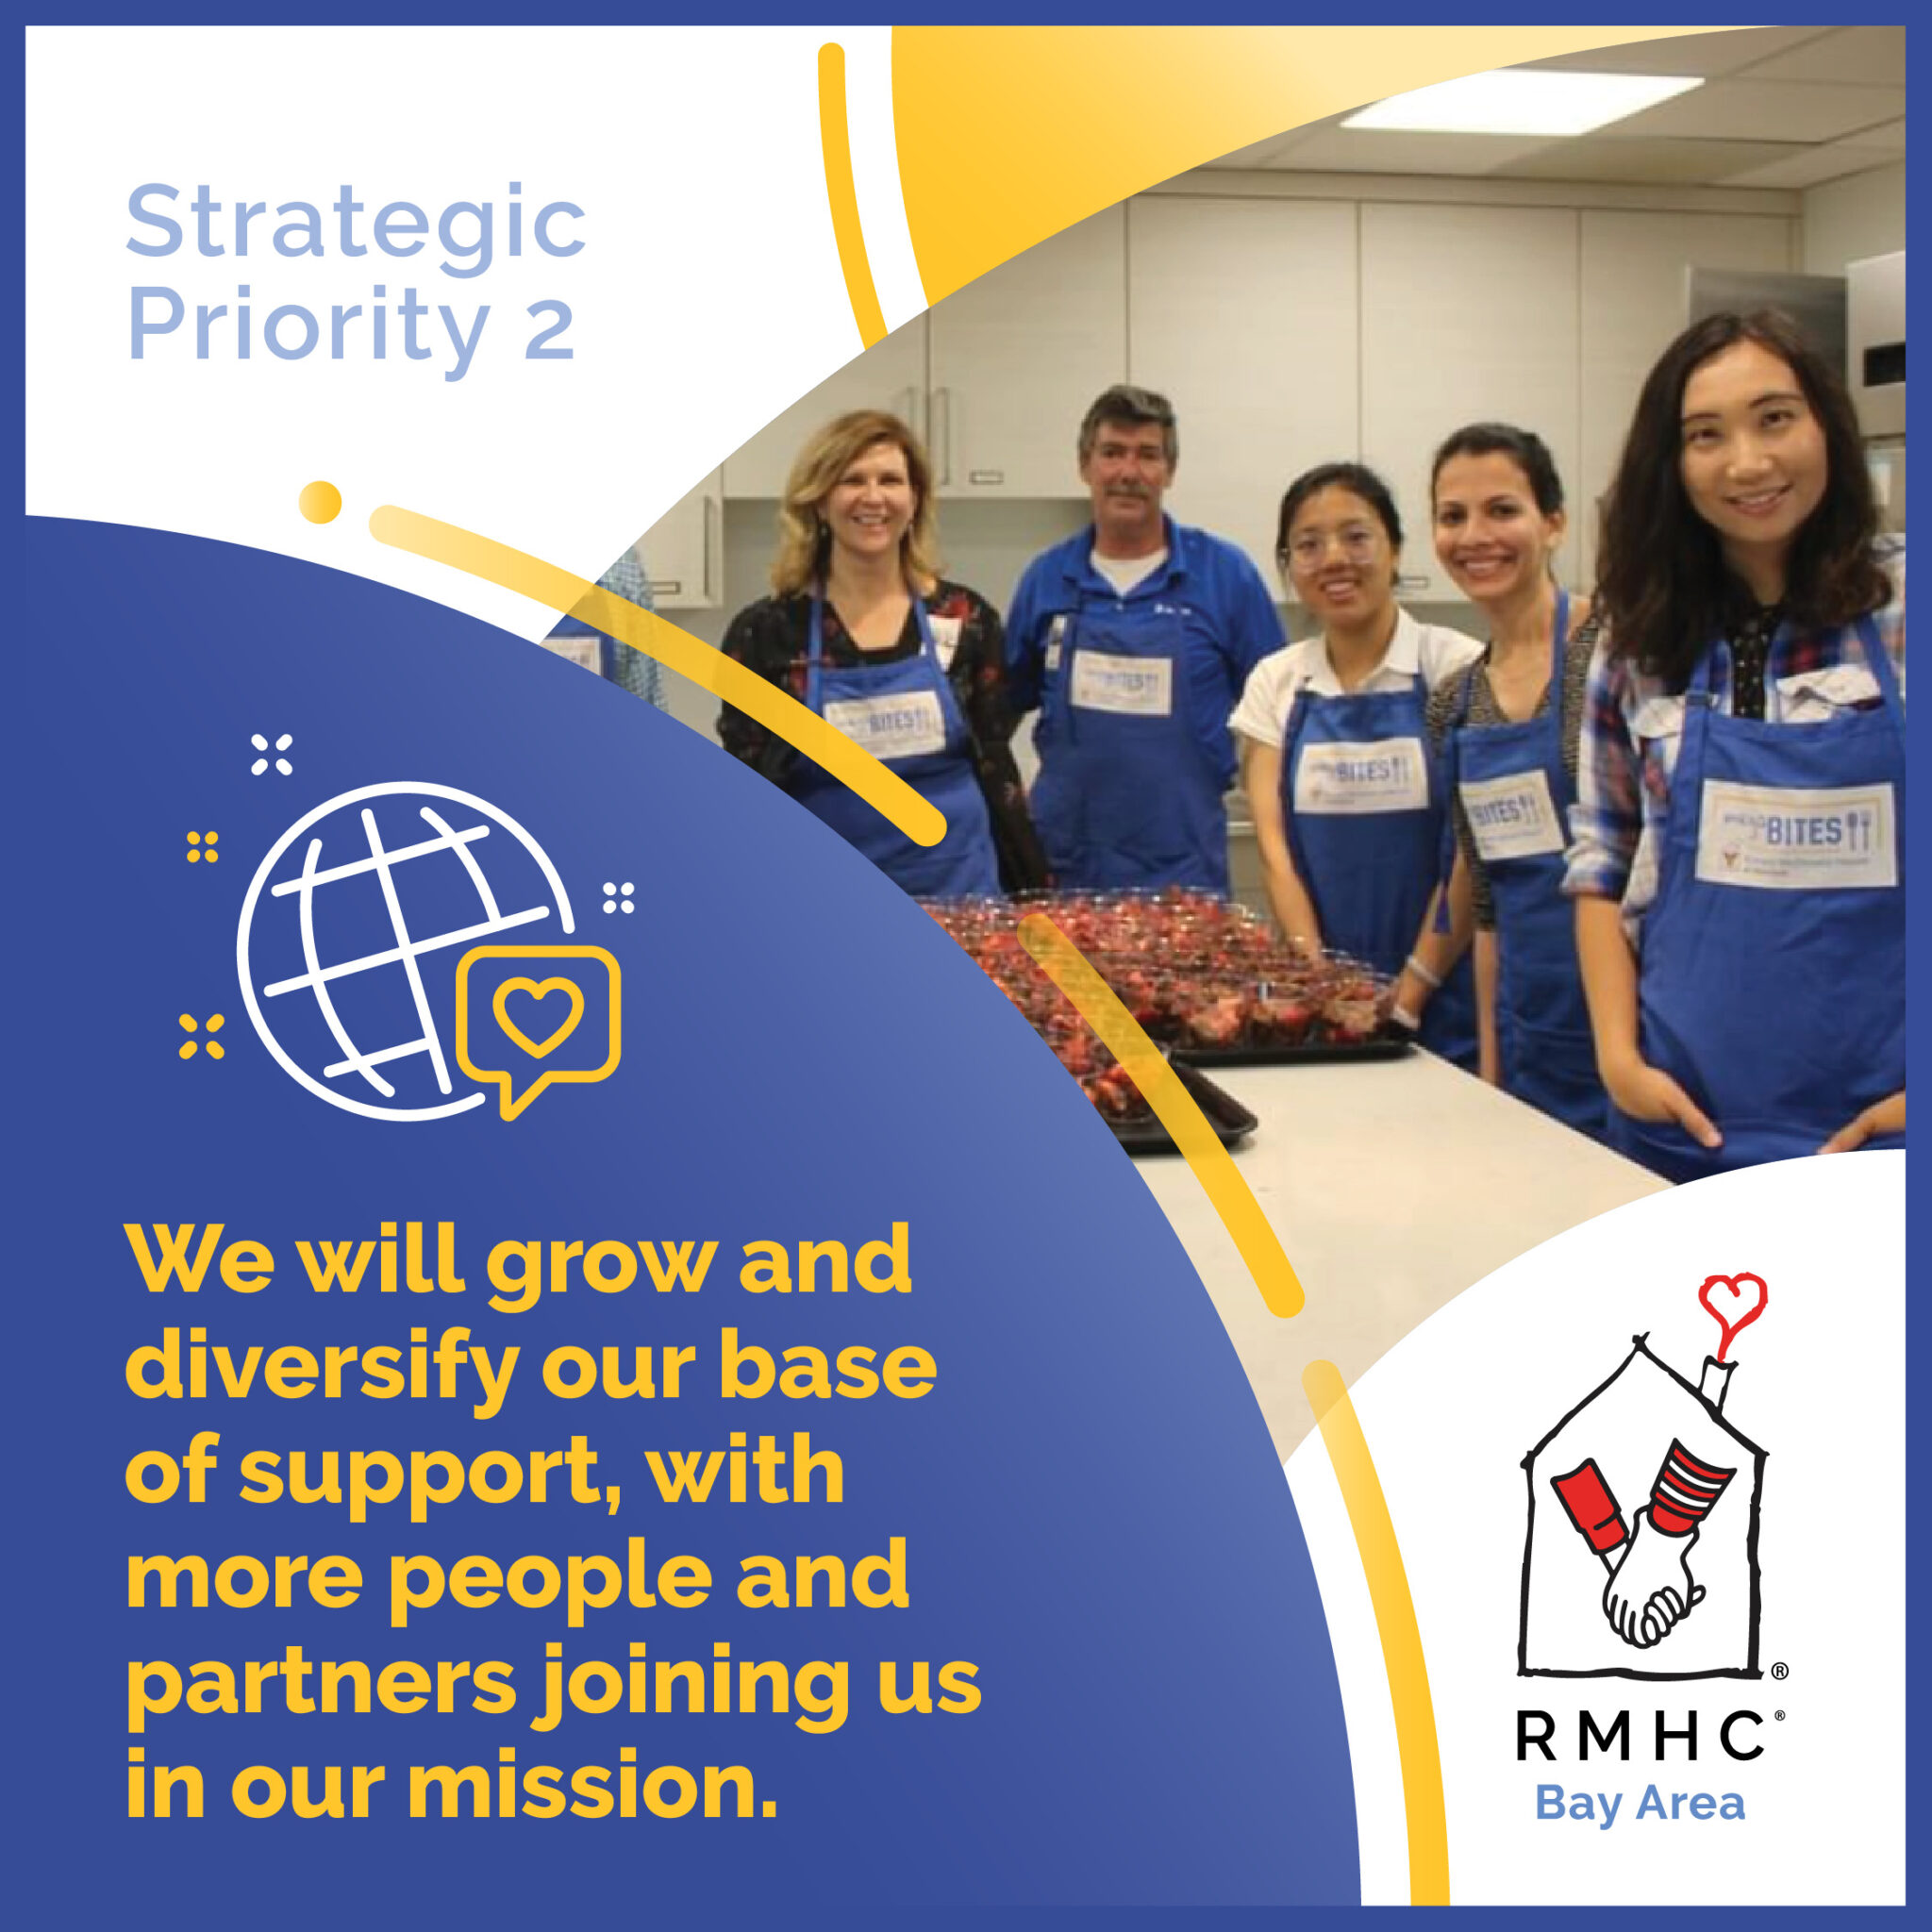 Strategic Priority 2 - We will grow and diversity our base of support, with more people and partners joining us in our mission.